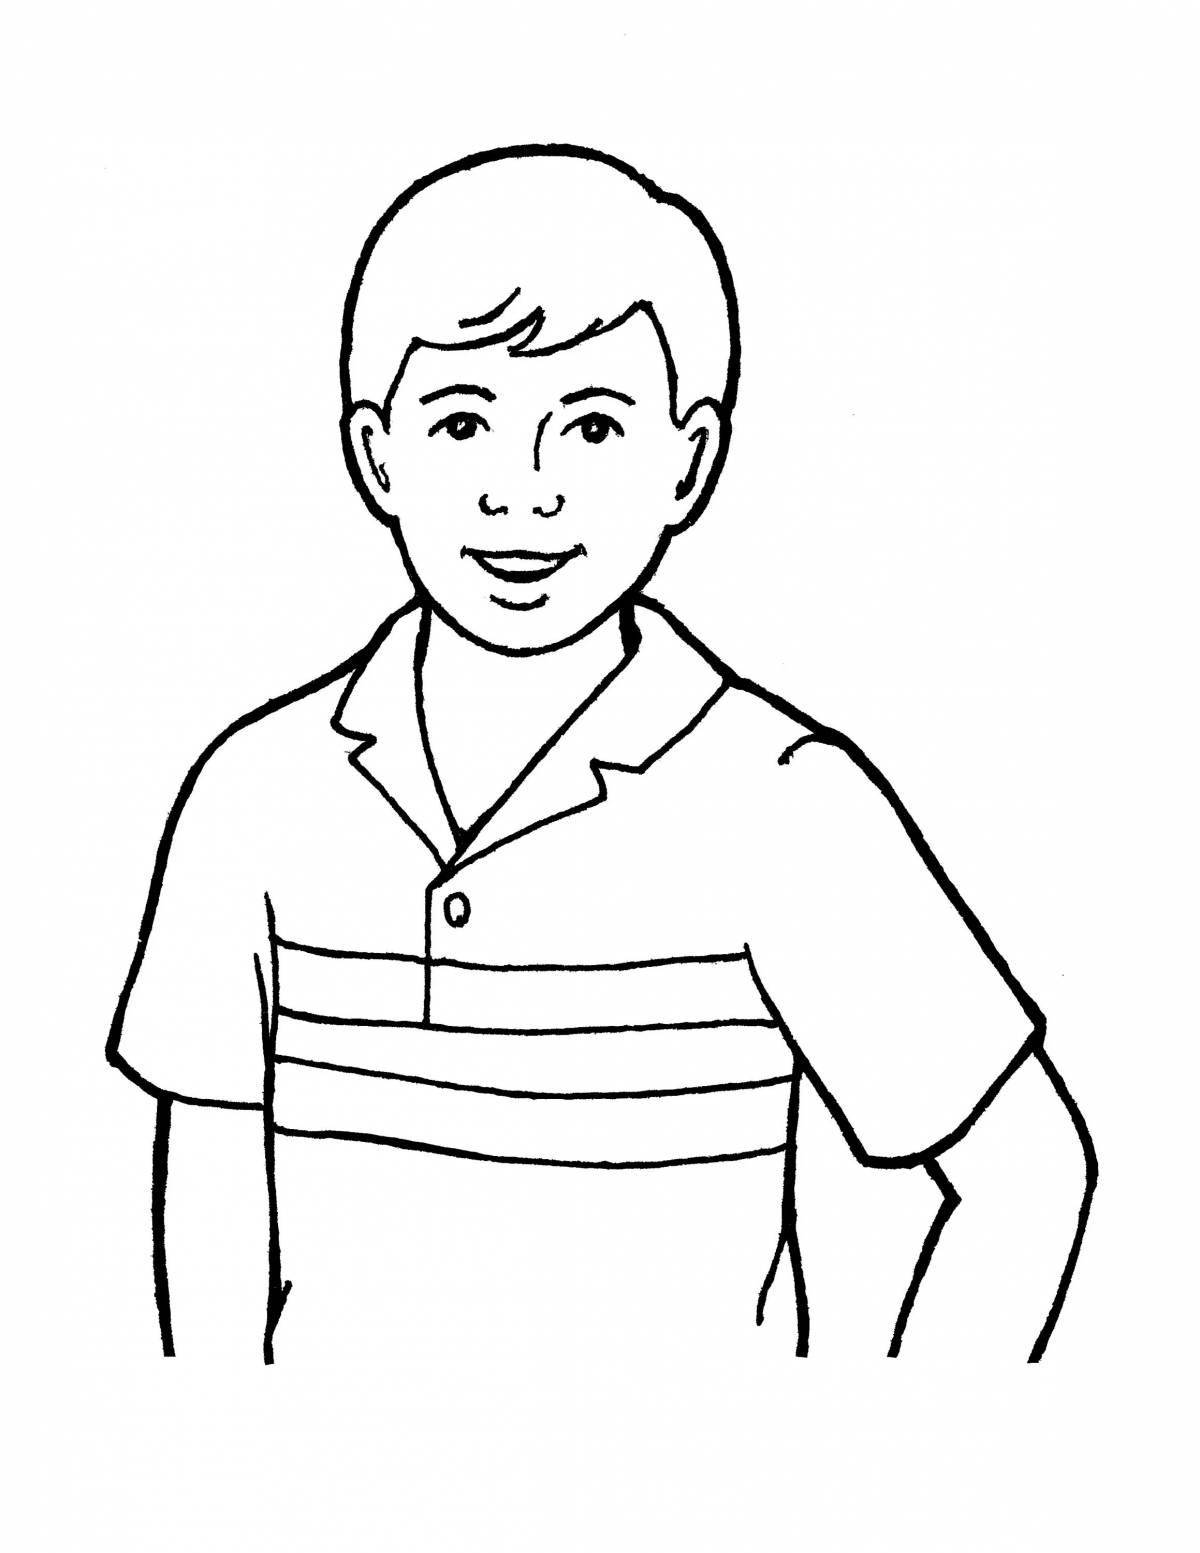 Animated portrait of a boy